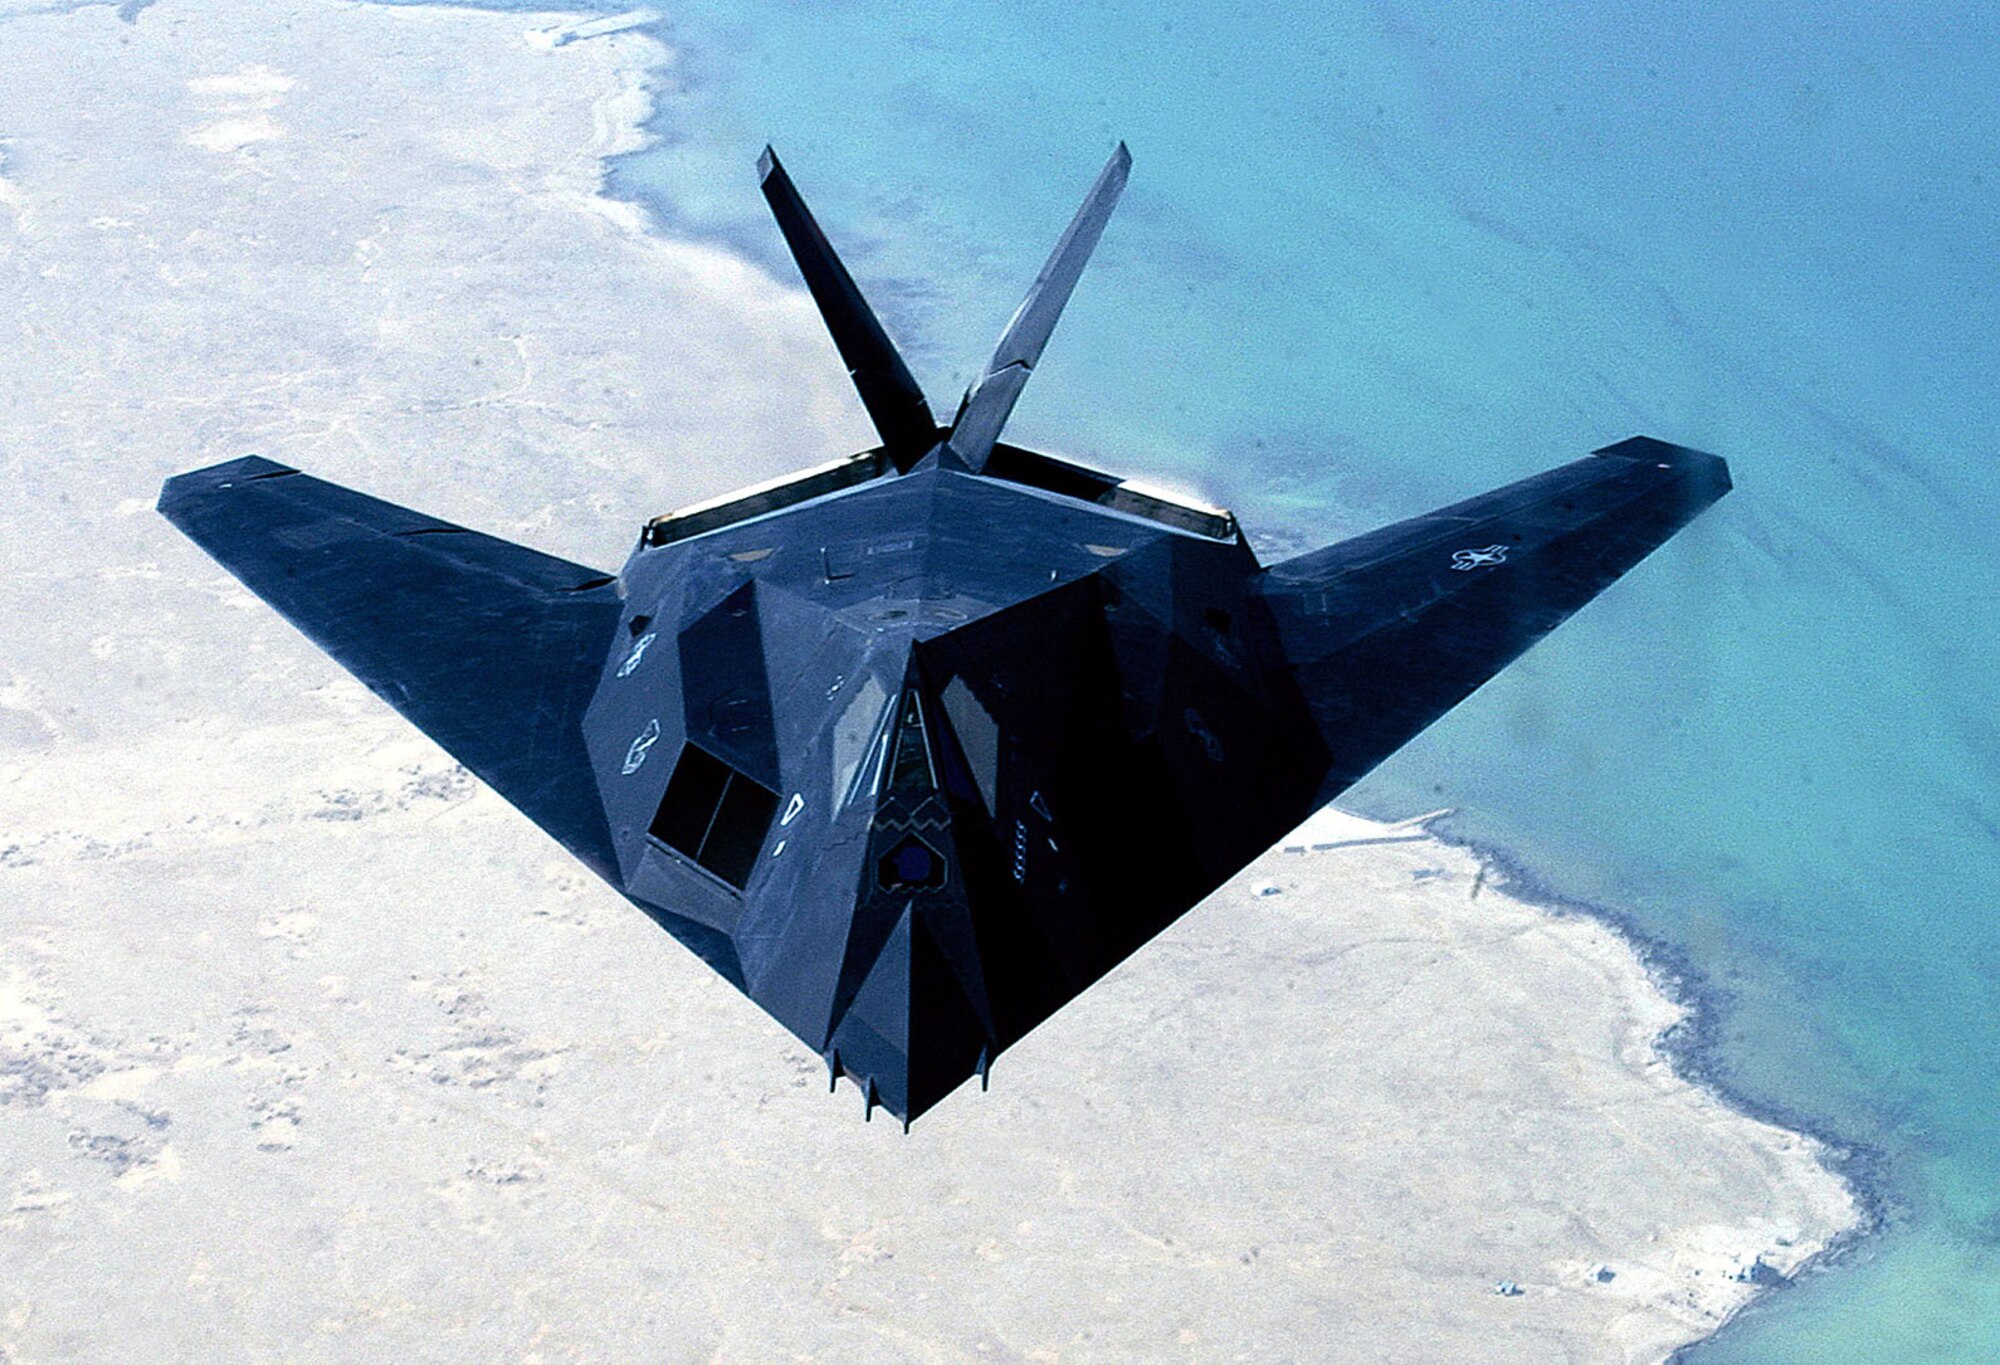 OPERATION IRAQI FREEDOM -- An F-117 from the 8th Expeditionary Fighter Squadron out of Holloman Air Force Base, N.M., flies over the Persian Gulf on April 14, 2003. The 8th EFS has begun returning to Hollomann A.F.B. after having been deployed to the Middle East in support of Operation Iraqi Freedom. (U.S. Air Force photo by Staff Sgt. Derrick C. Goode)